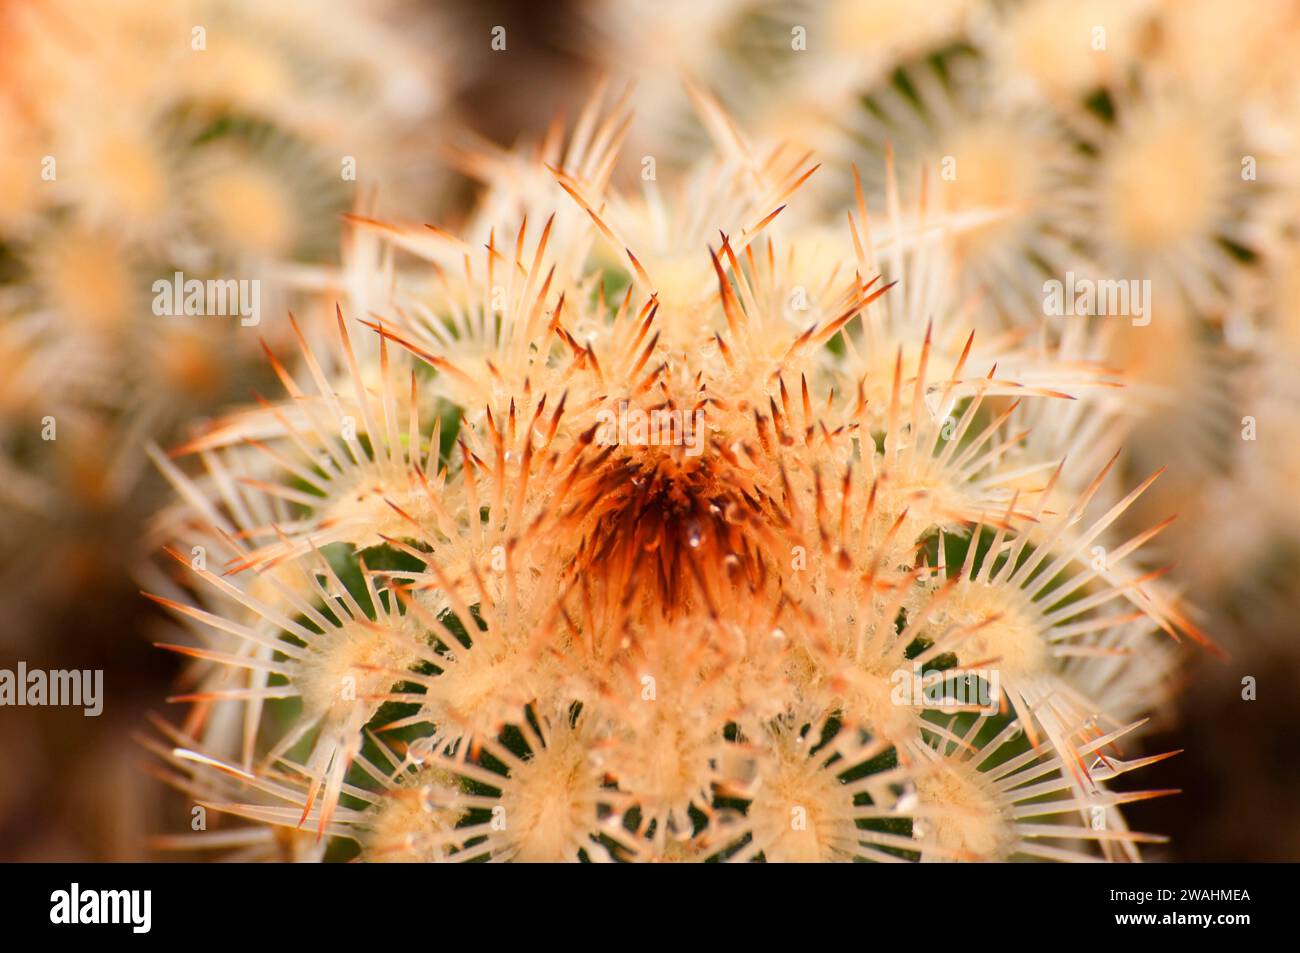 Lace cactus, Enchanted Rock State Park, Texas Stock Photo